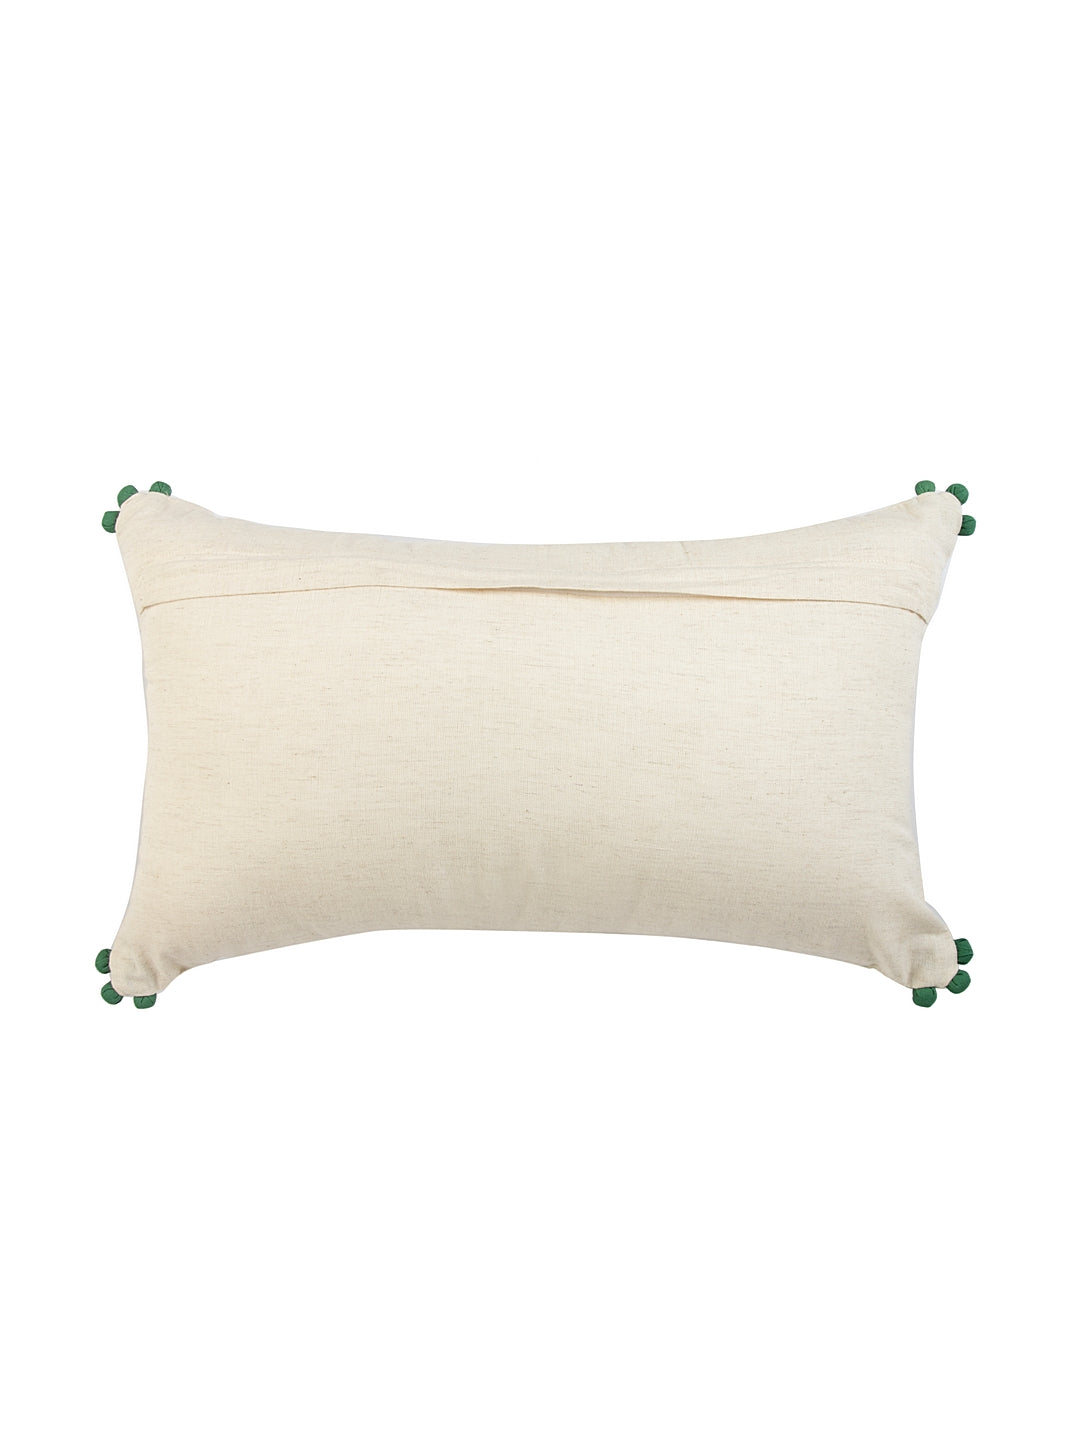 Bead Embroidery Cushion Cover with Filler 30x50cm